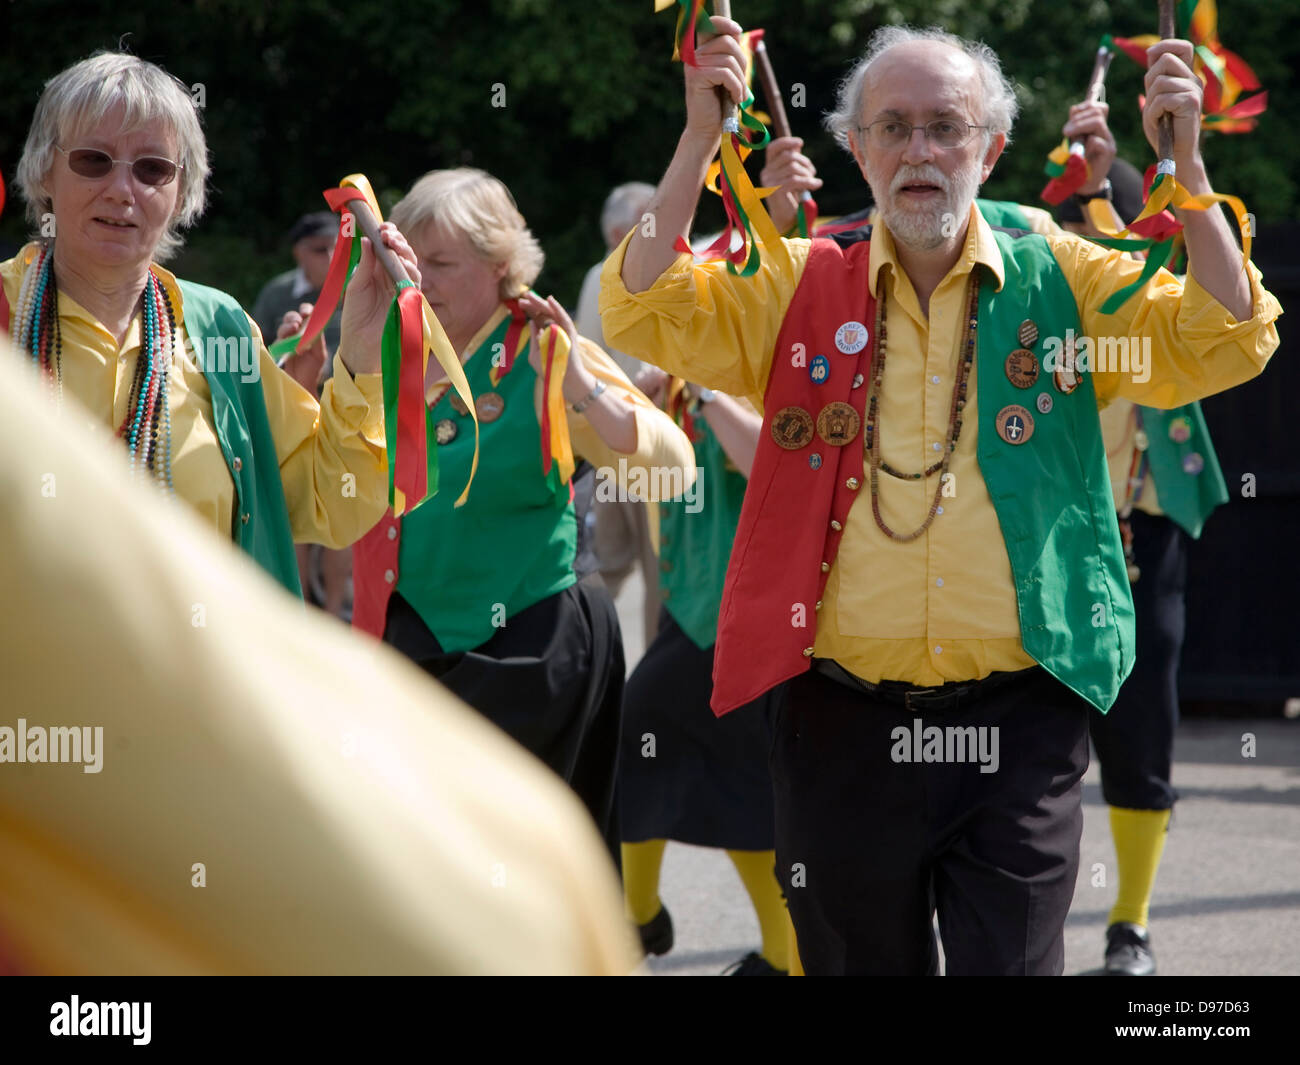 Male and female traditional Morris dancers perform at rural folk event, Shottisham, Suffolk, England Stock Photo